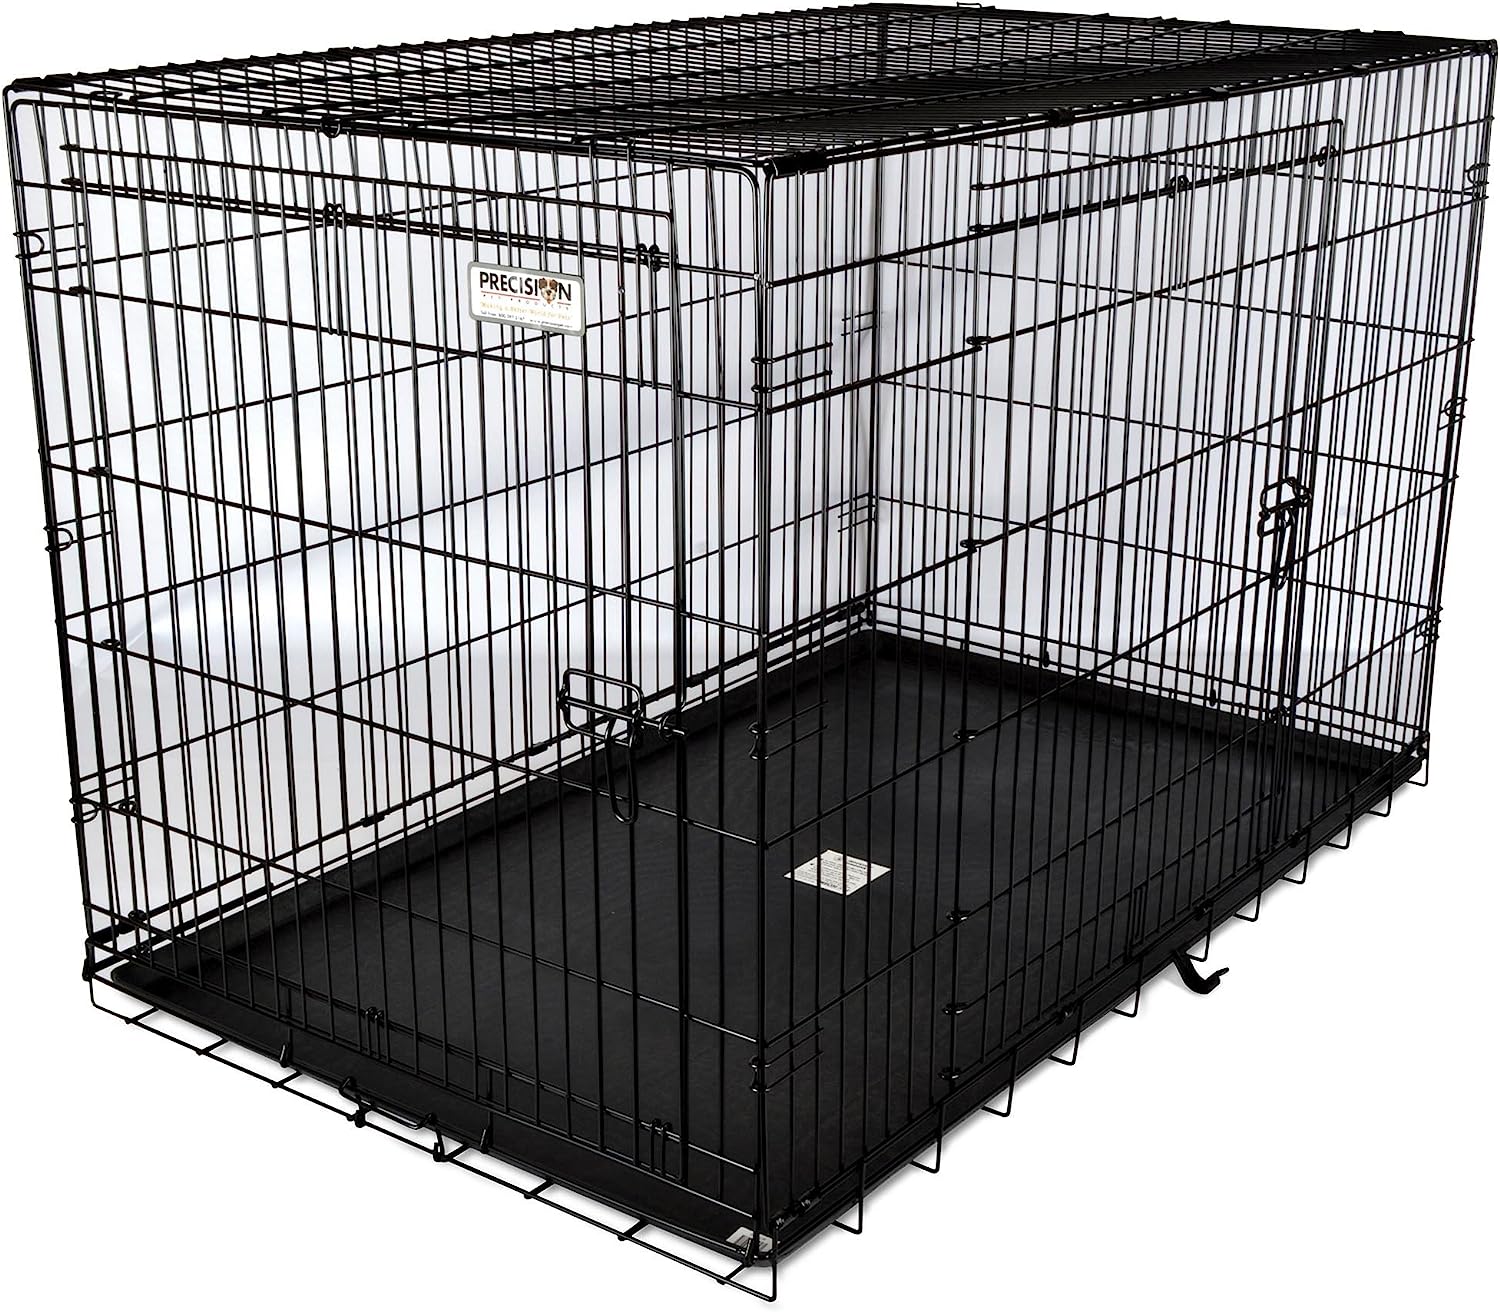 Precision Pet Products Two Door Great Crate Wire Dog Crate, 42 Inch, For Pets 70-90 lbs